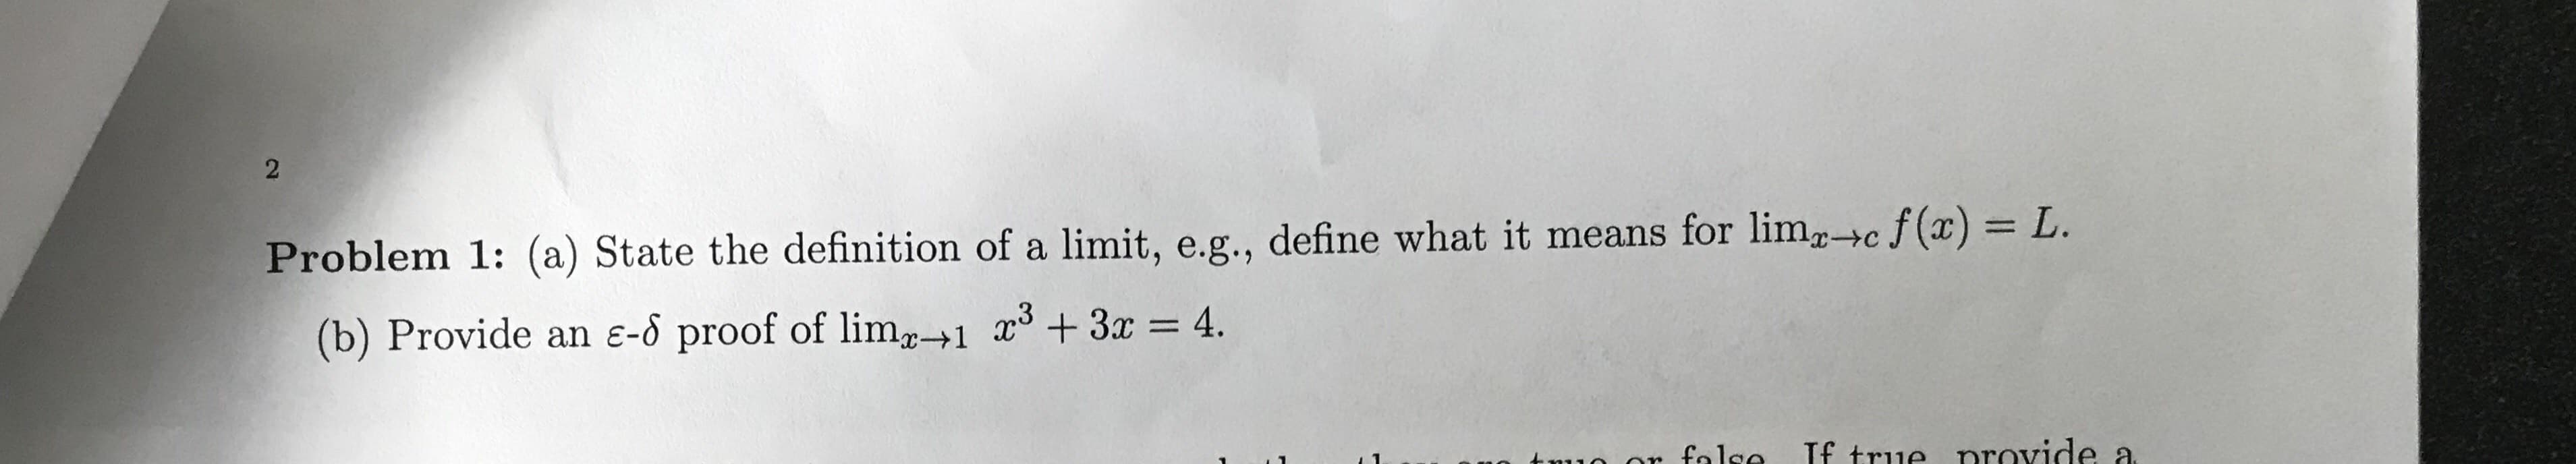 2
Problem 1: (a) State the definition of a limit, e.g., define what it means for limc f(x) = L
(b) Provide an e-o proof of lim+1 x +3x = 4.
If true nrovide a
o ar falco
